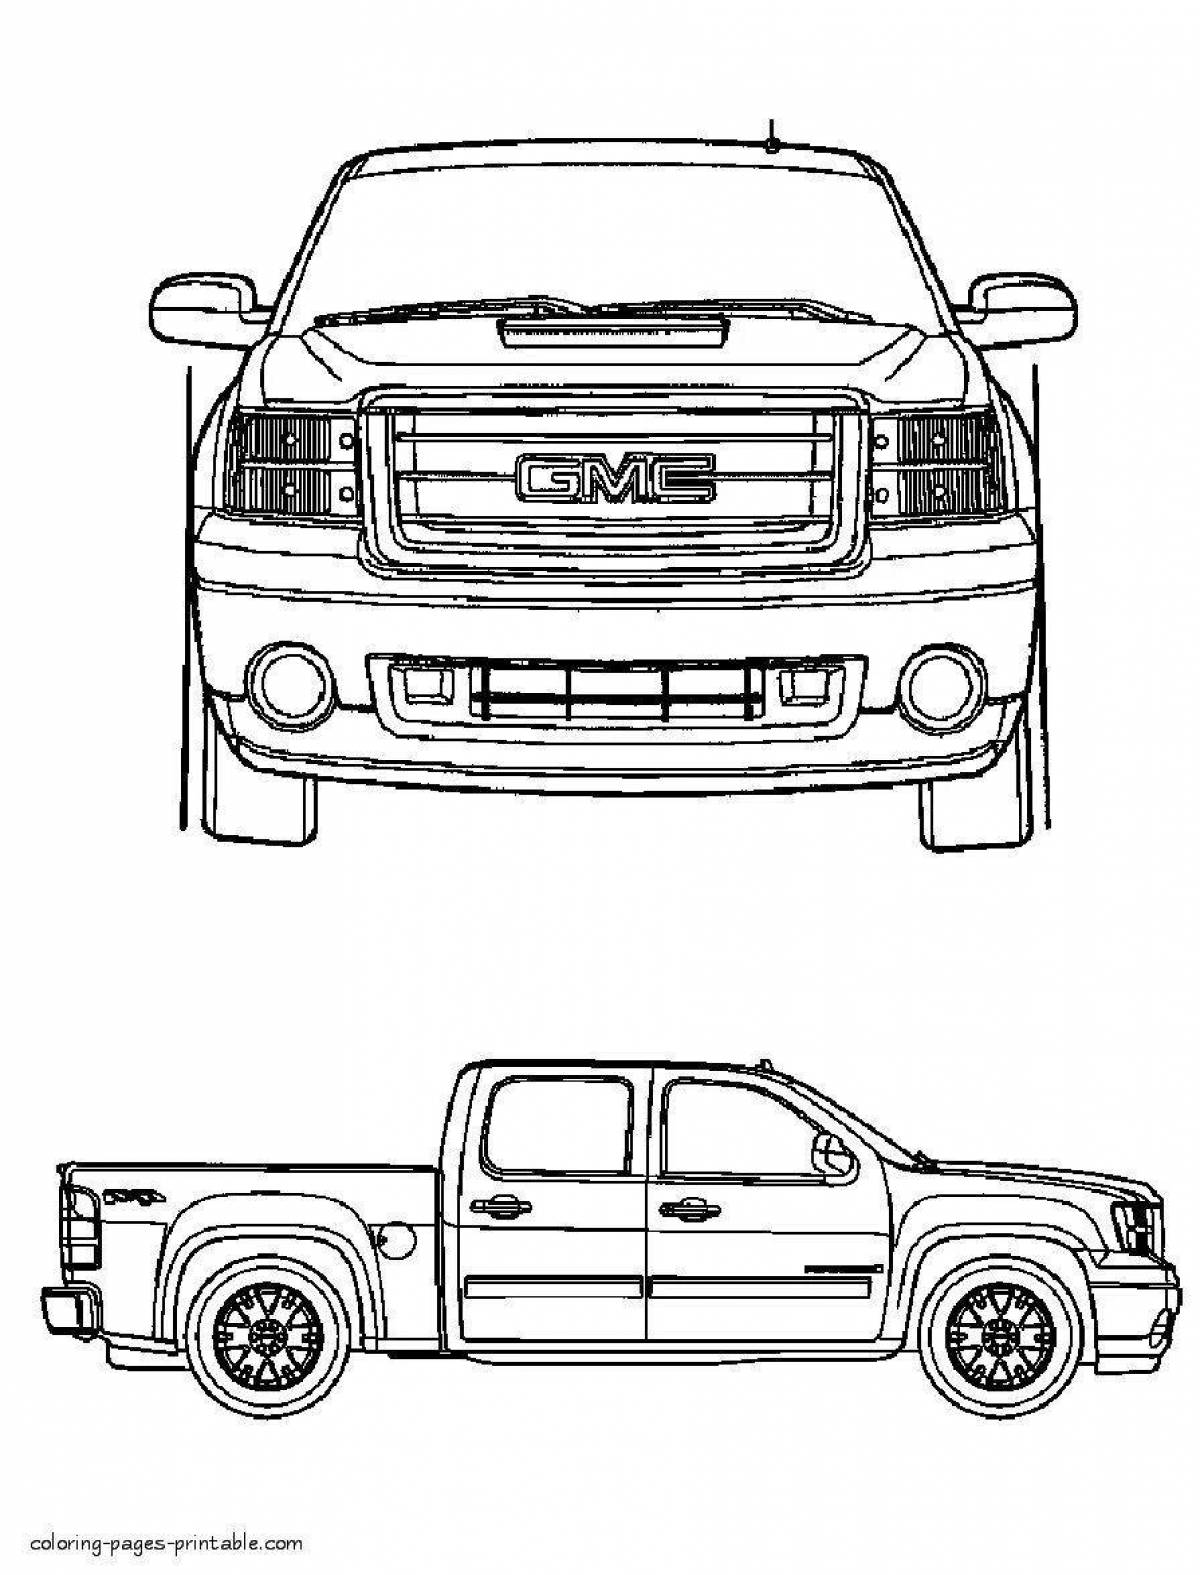 Coloring book glowing ford pickup